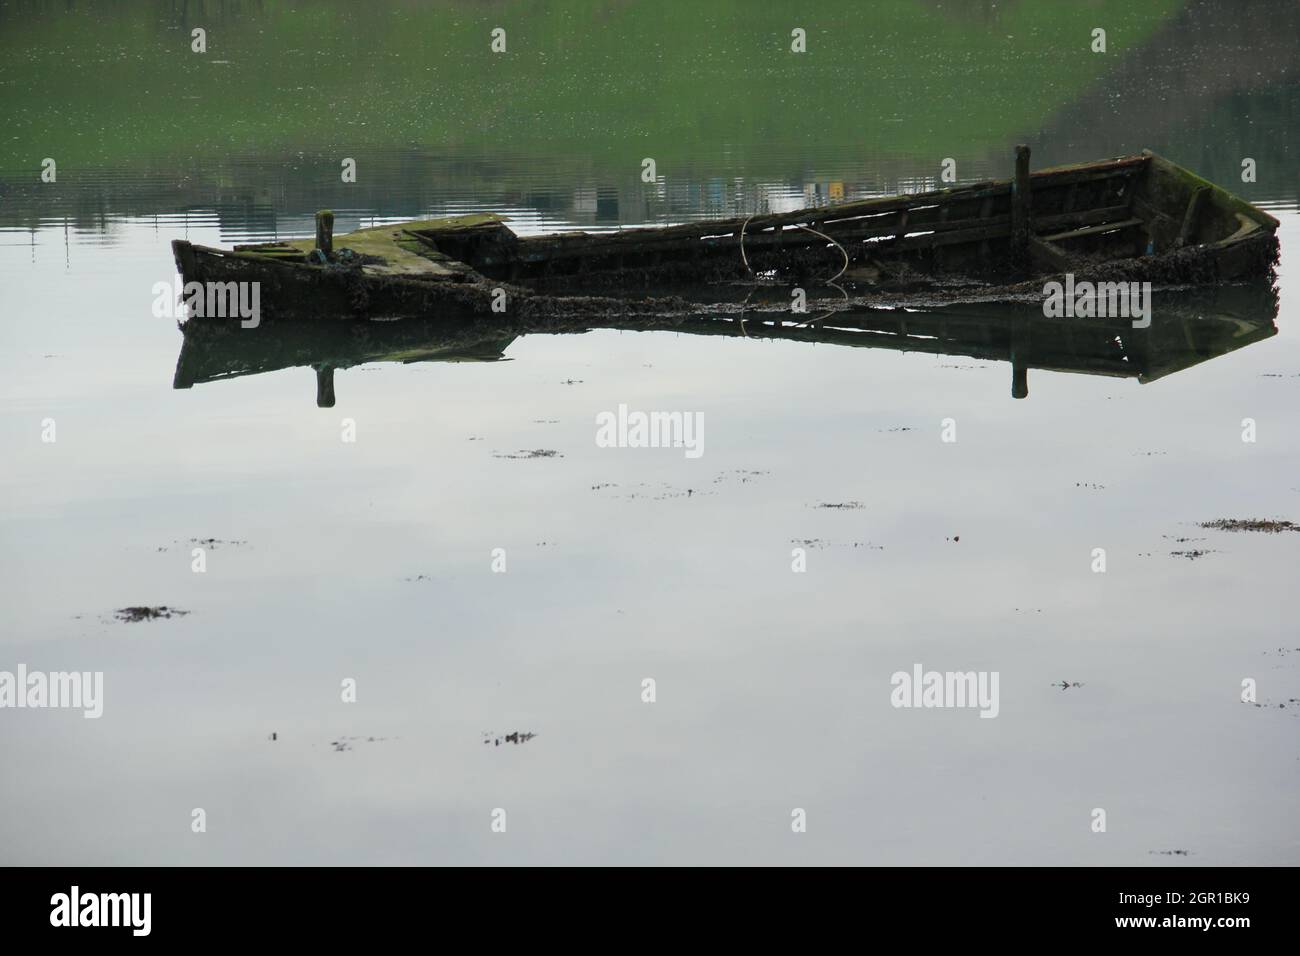 Wrecked rotting hulk lying in shallow water Stock Photo